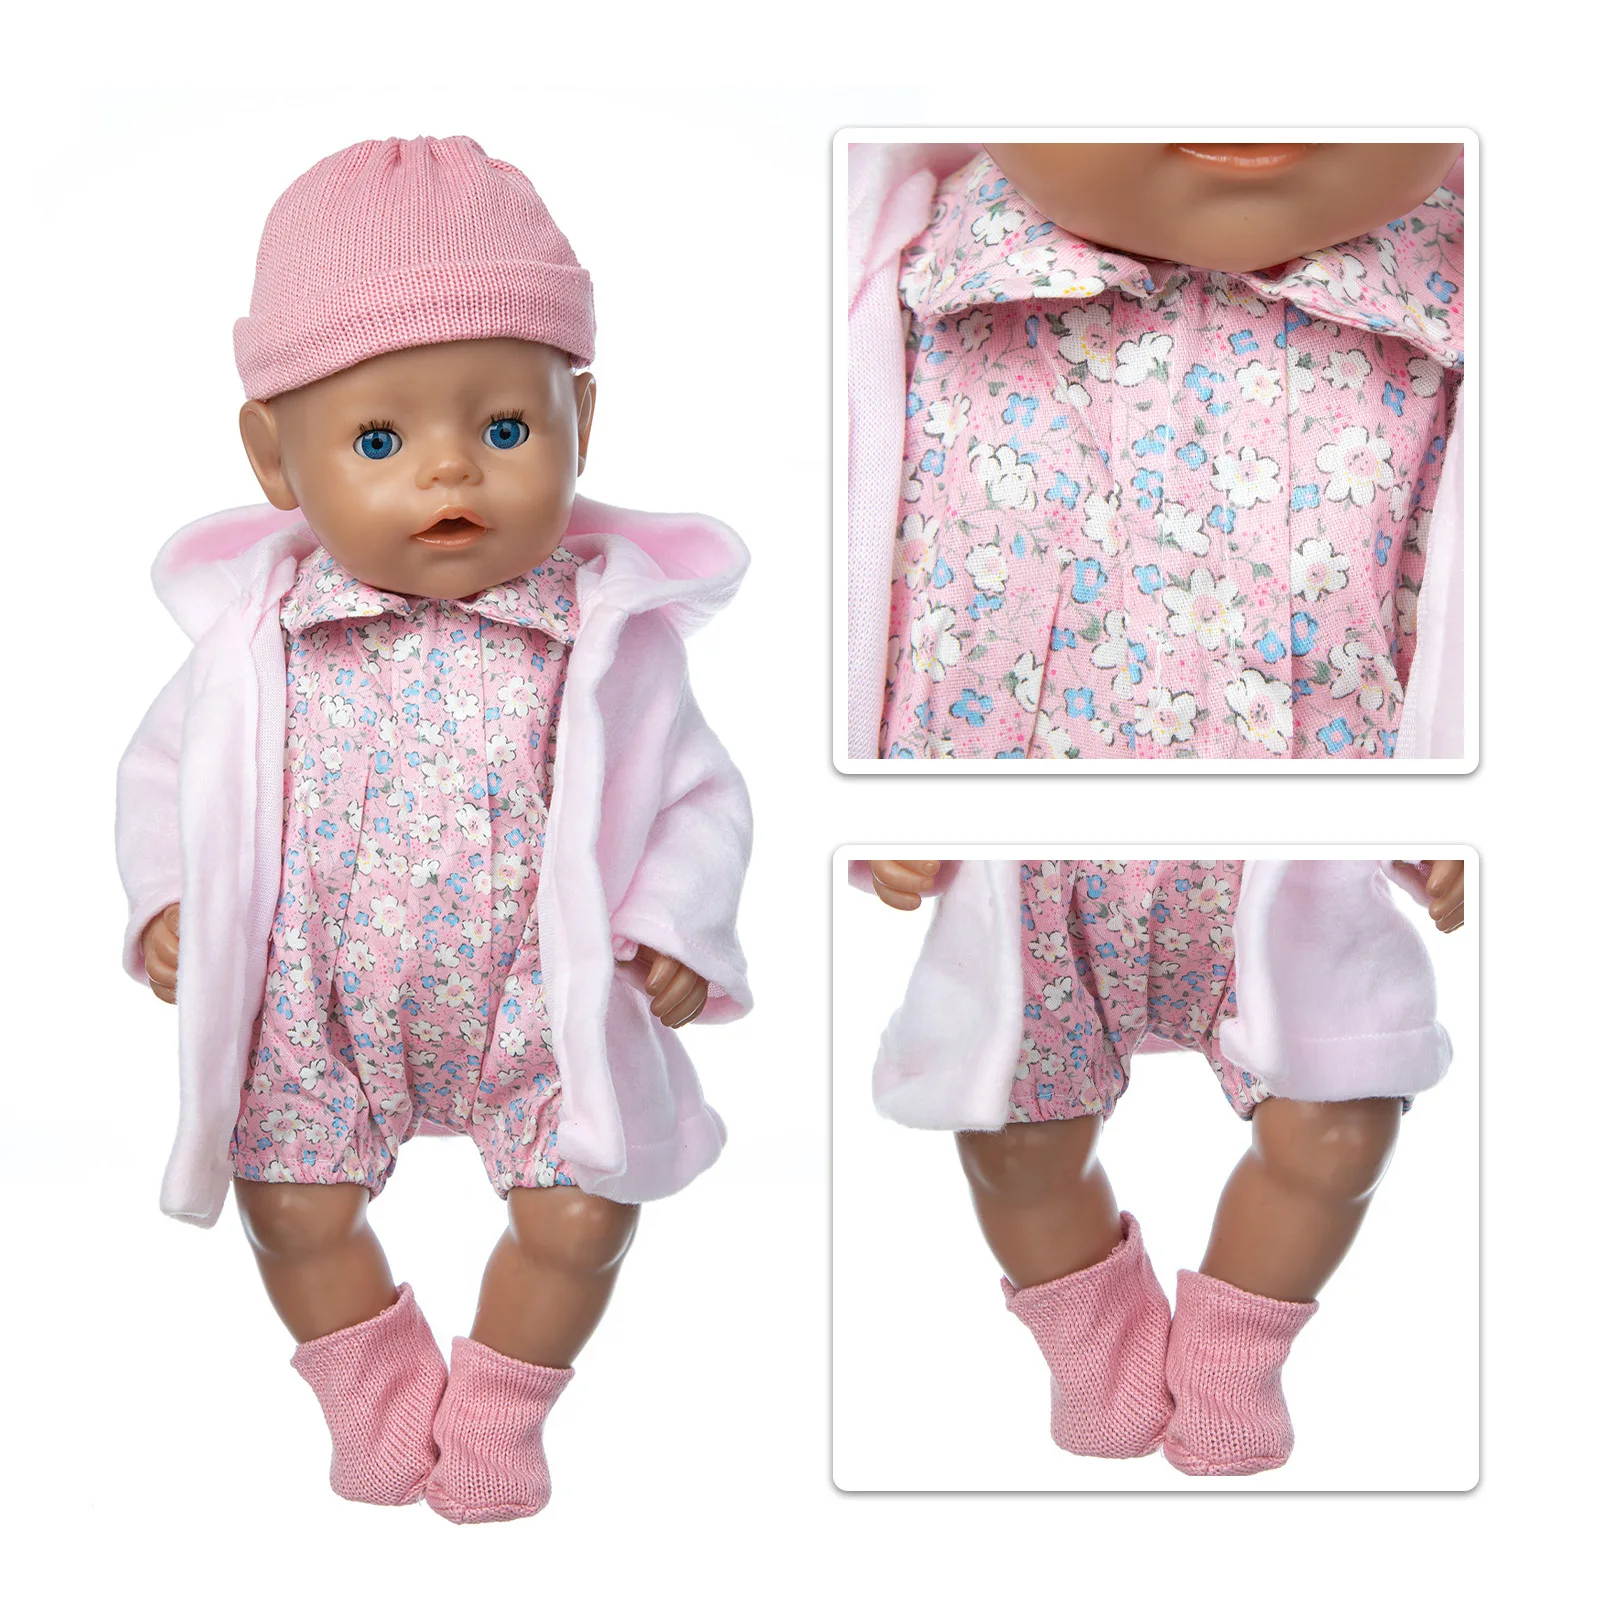 

Happy Elfin Baby New Born Fit 18 inch 43cm Doll Clothes Accessories Cute Animal Suit For Baby Birthday Gift